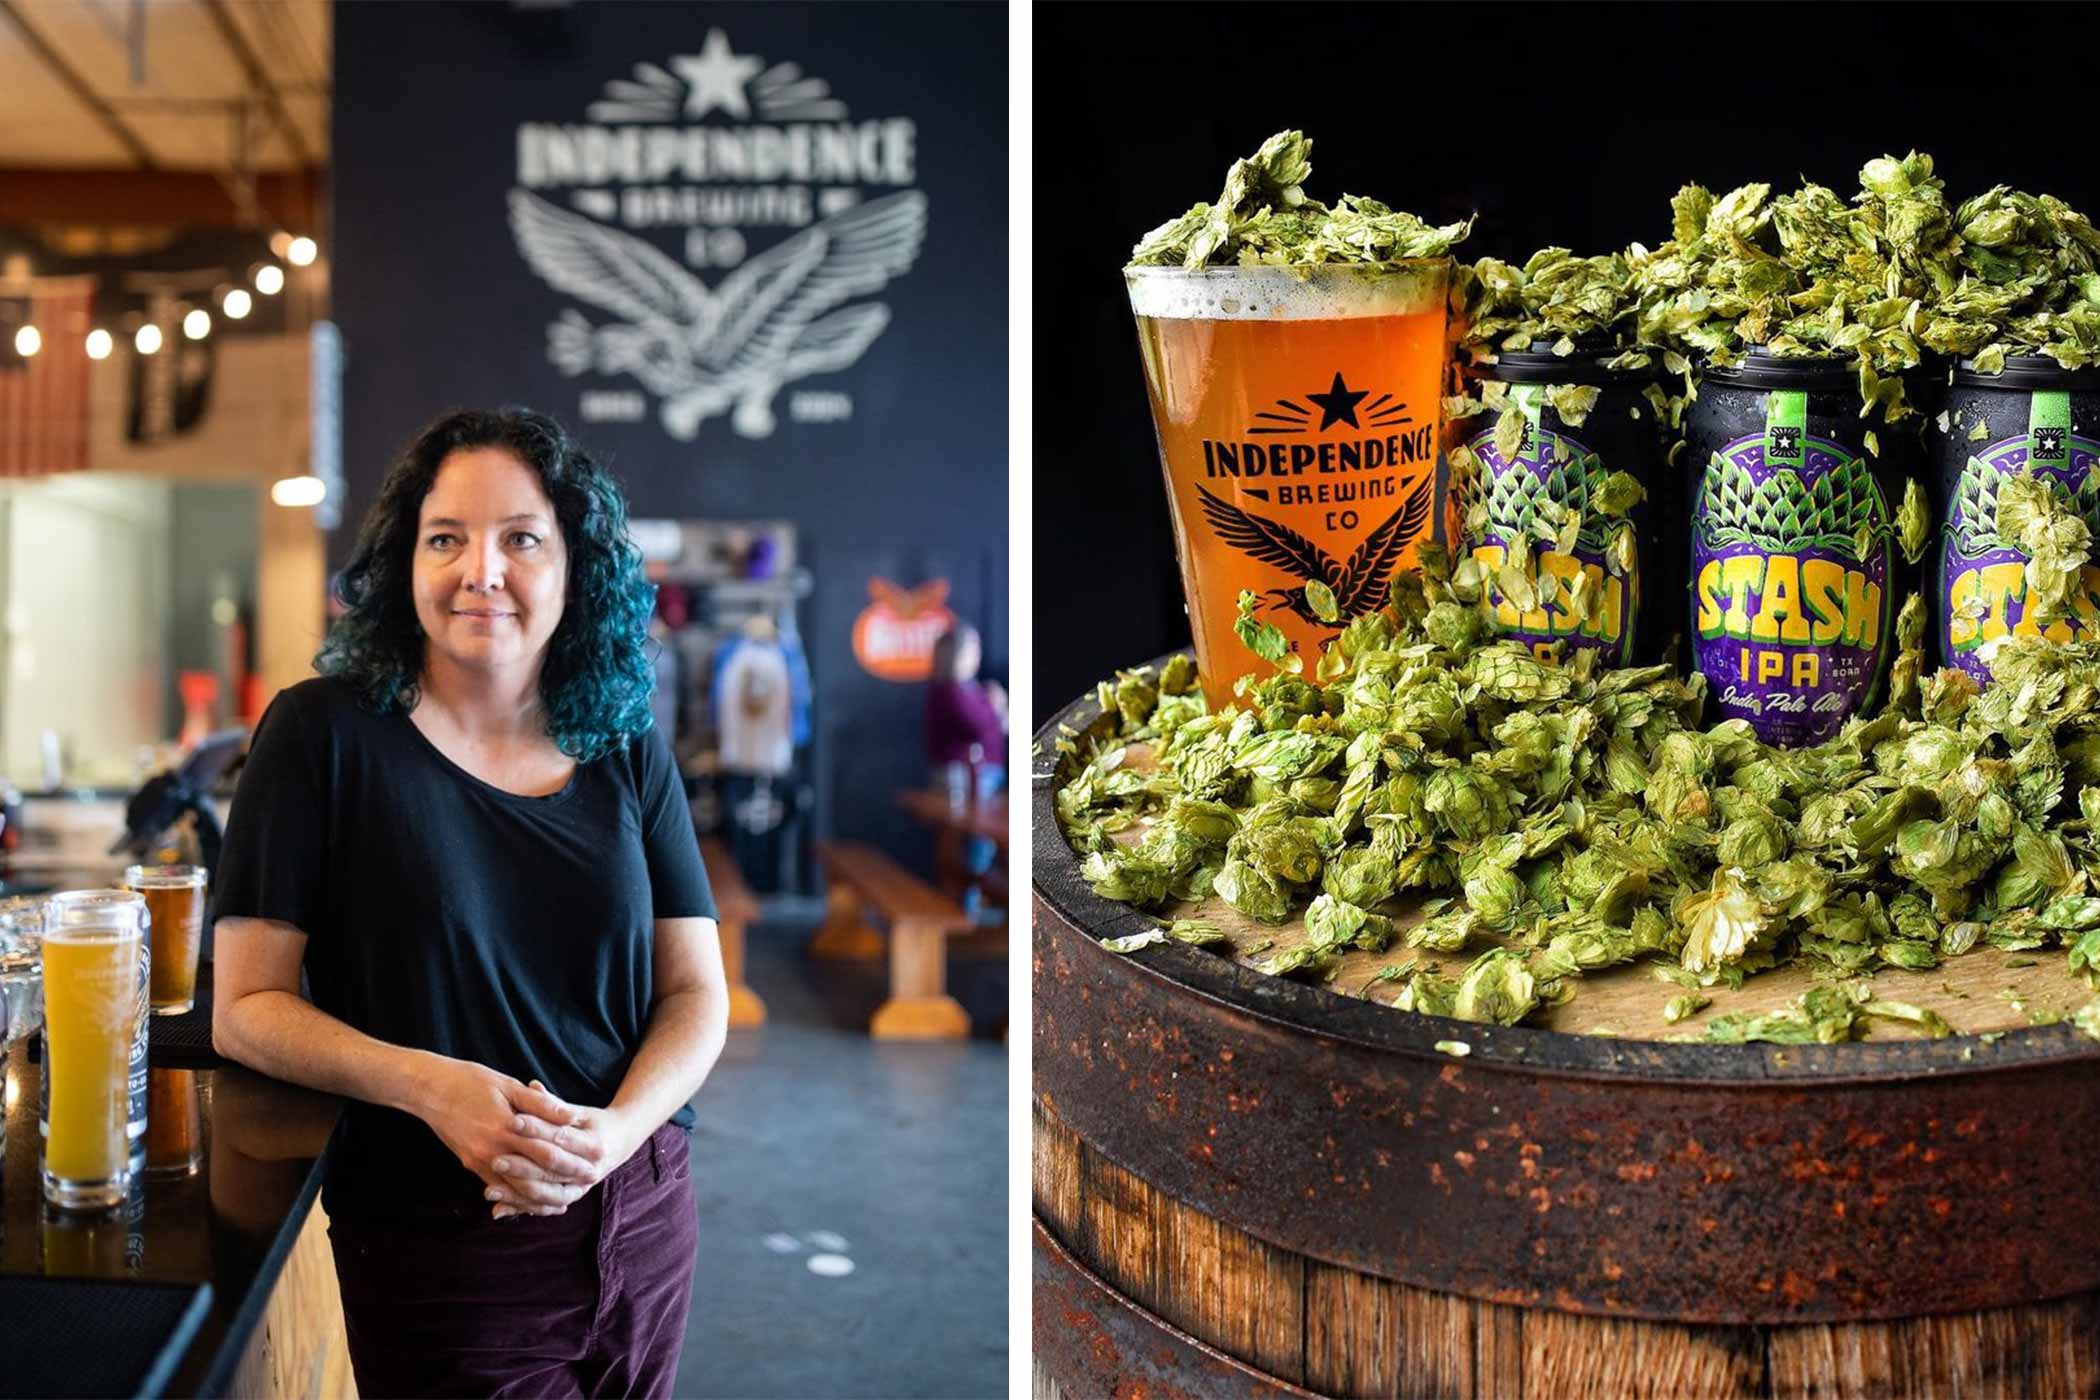 How Amy Cartwright Built Independence Brewing Co. into One of the Largest Breweries in Texas